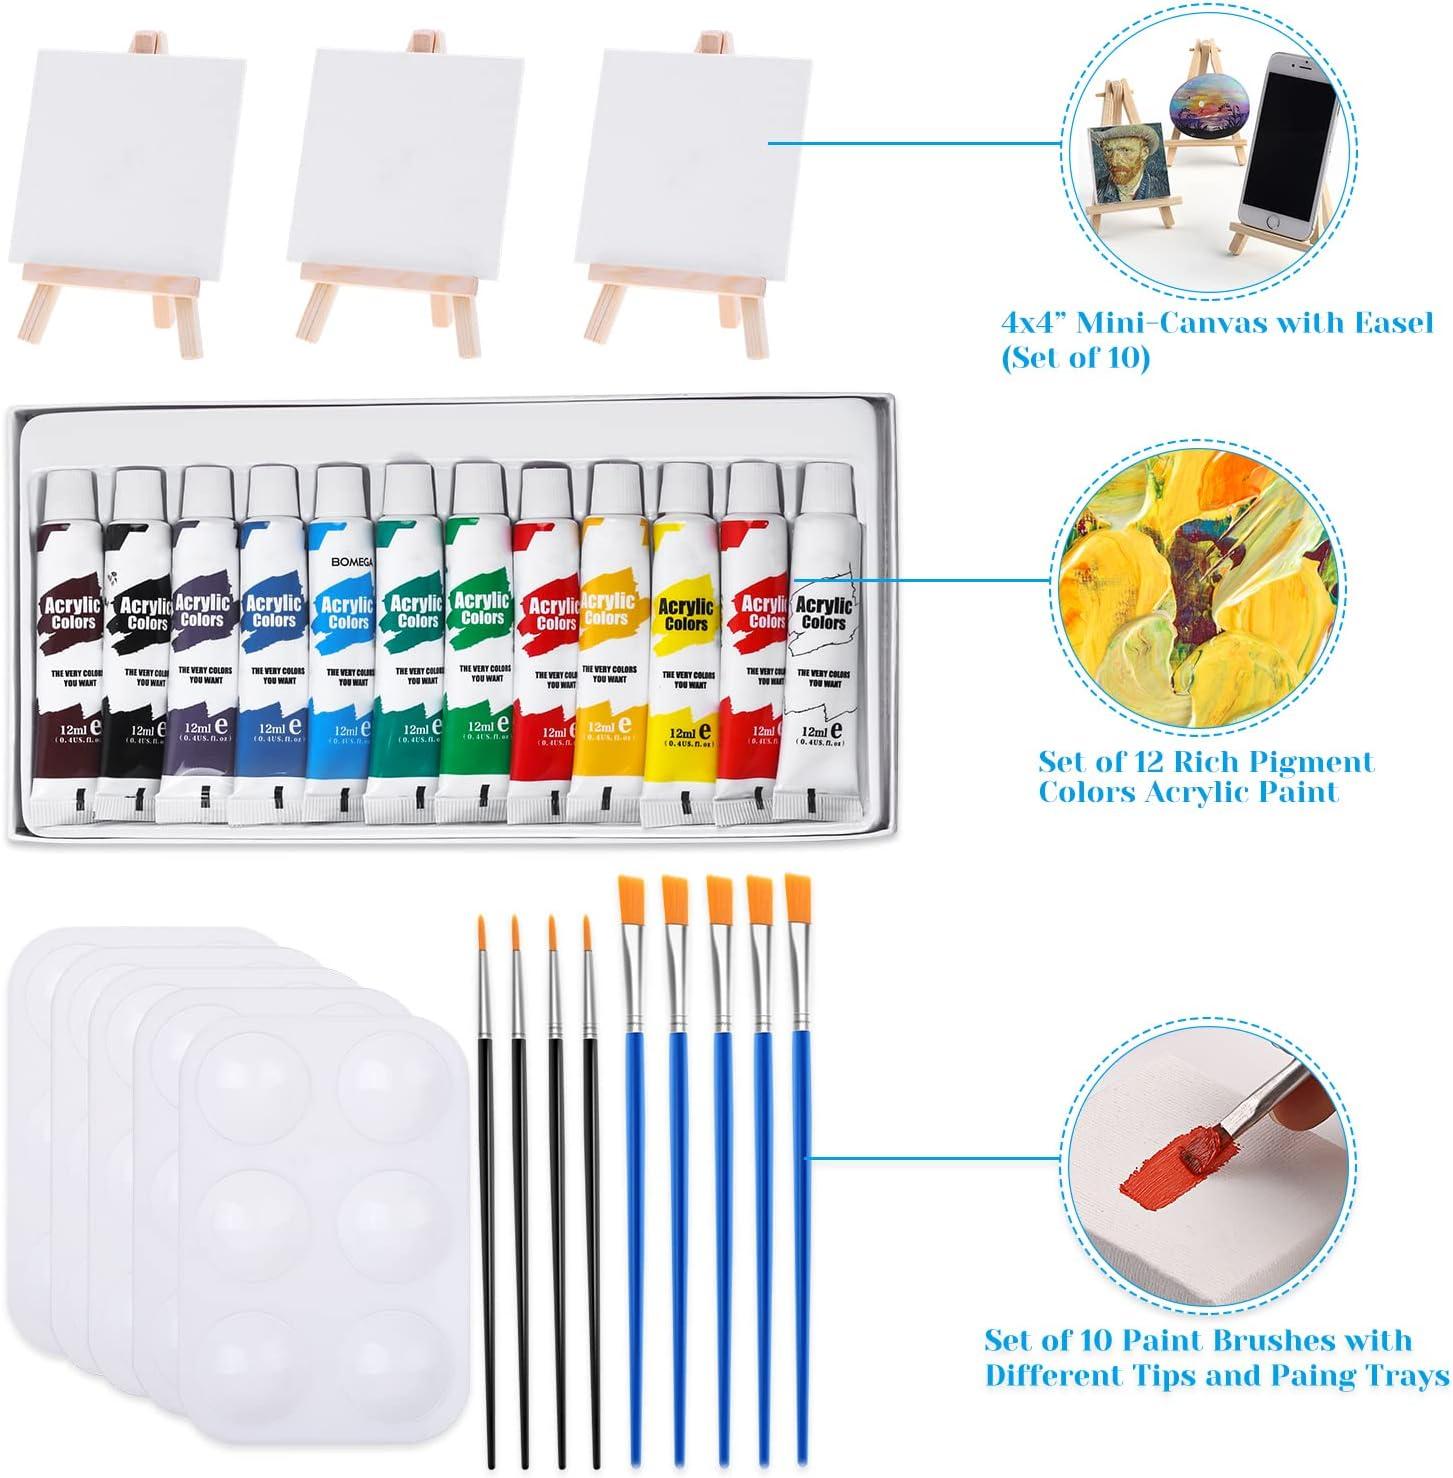 Mini Canvas and Easel Cridoz 47 Pieces Mini Canvas Painting Set Includes  4x4 Inches Primed Canvas Mini Easel Acrylic Paint Paintbrushes and Palette  for Kids Artists Art Party